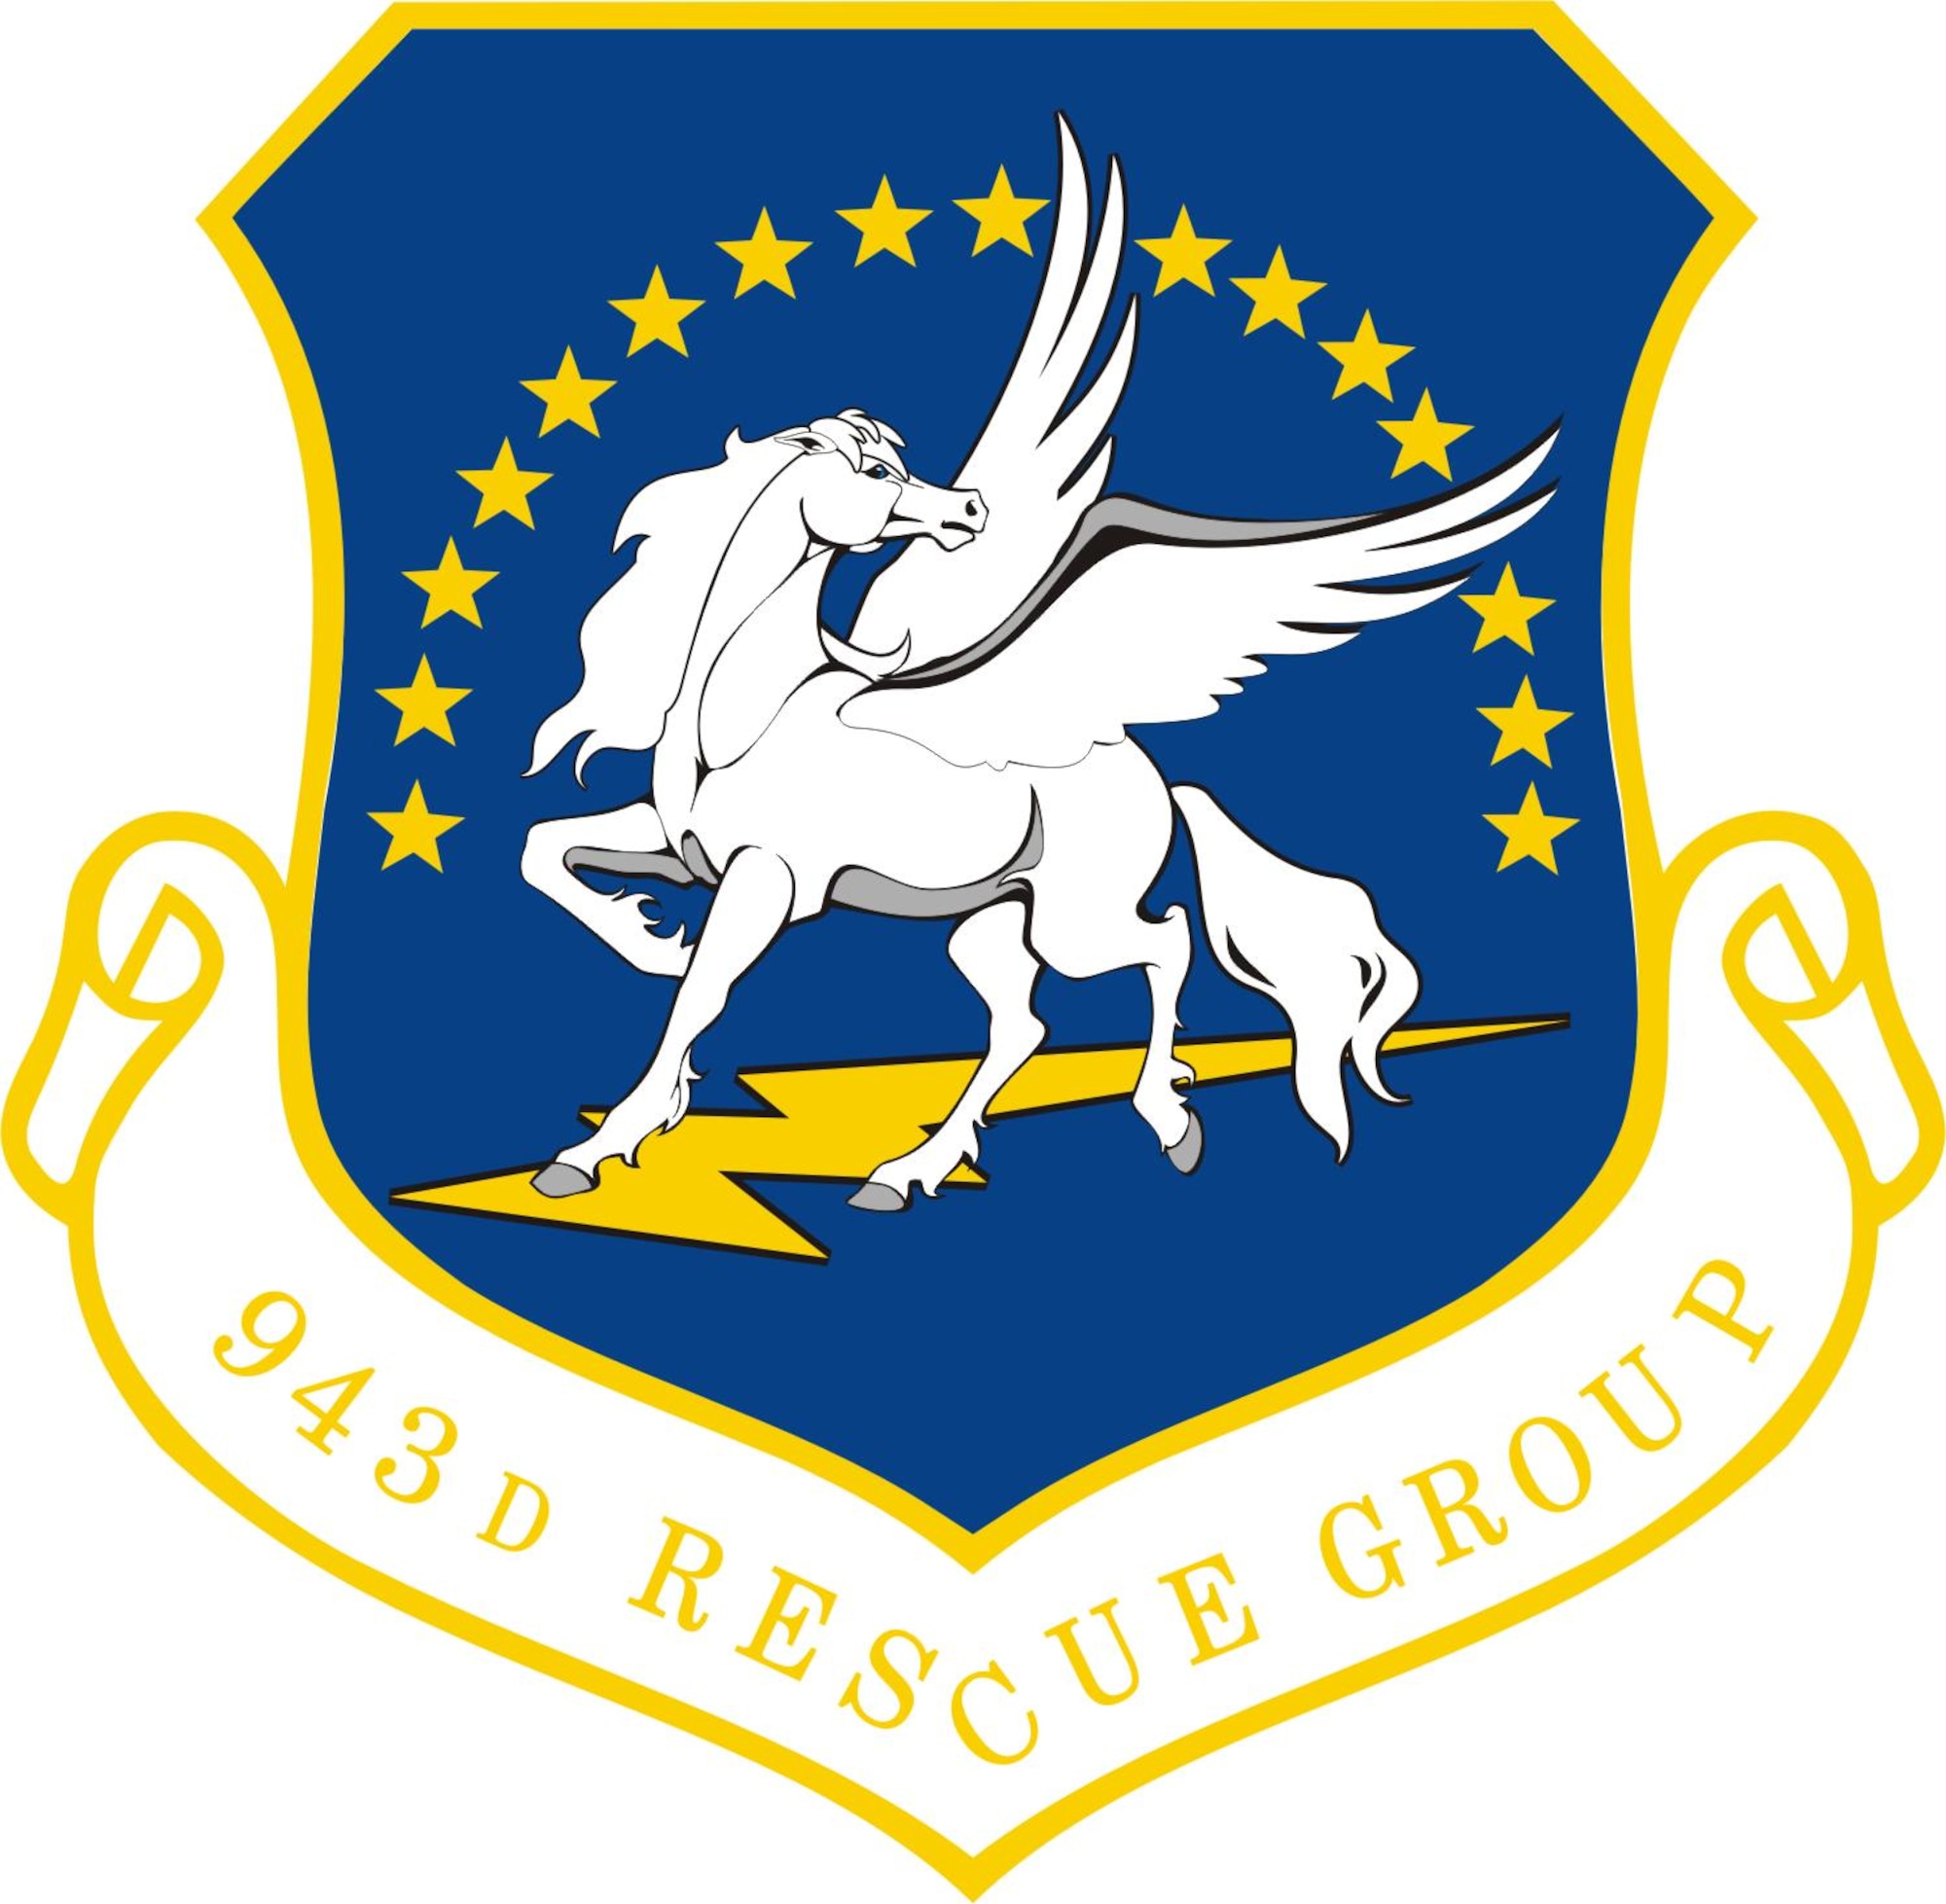 943rd Rescue Group unit shield